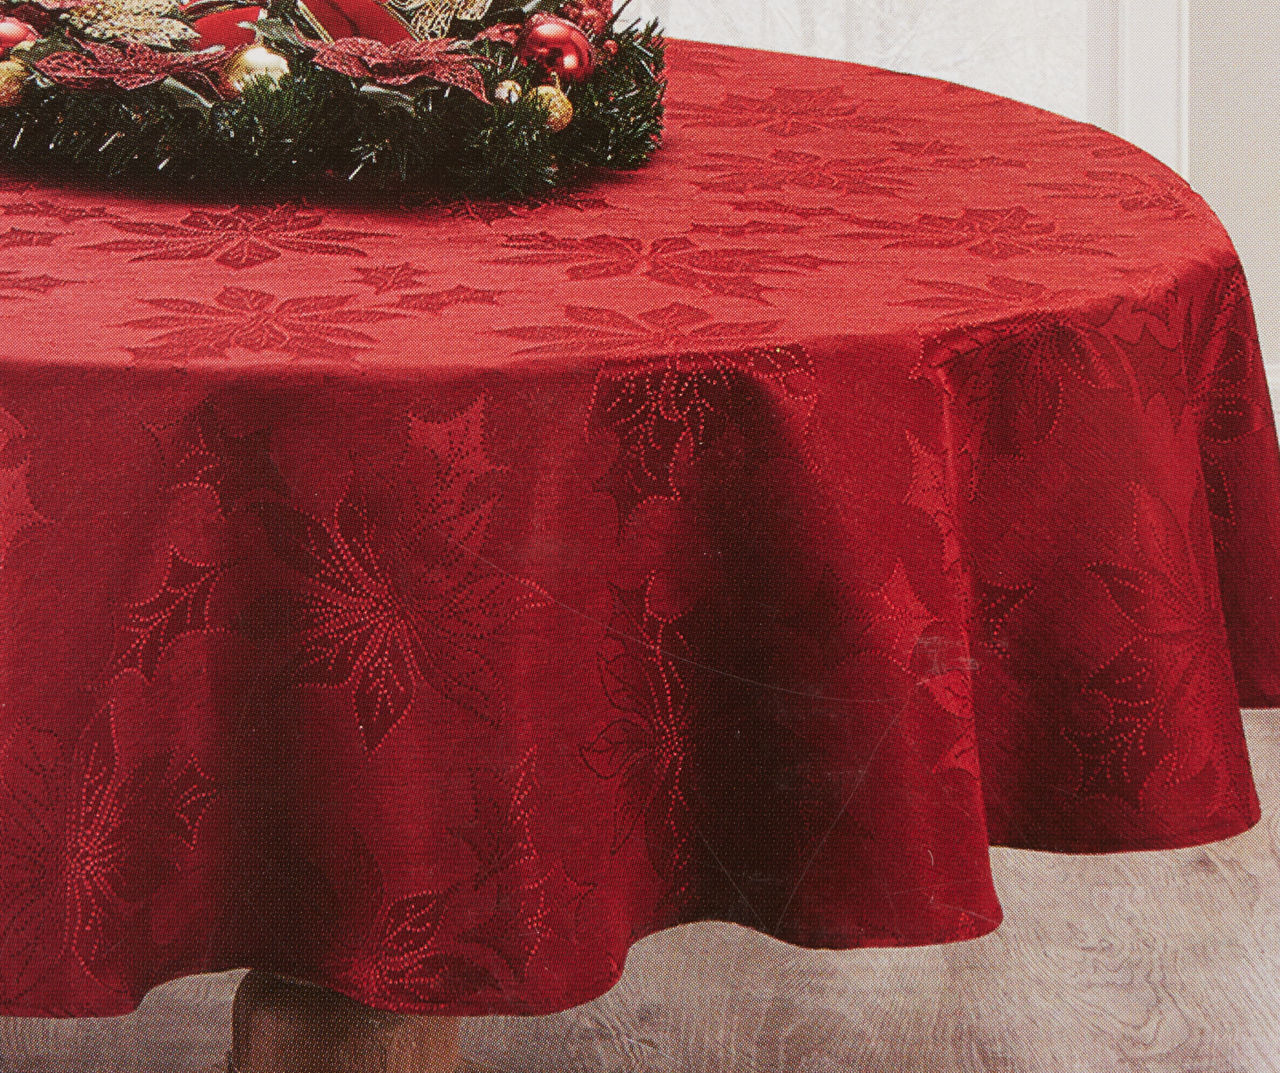 Santa's Workshop Red Poinsettia Round Fabric Tablecloth, (60")